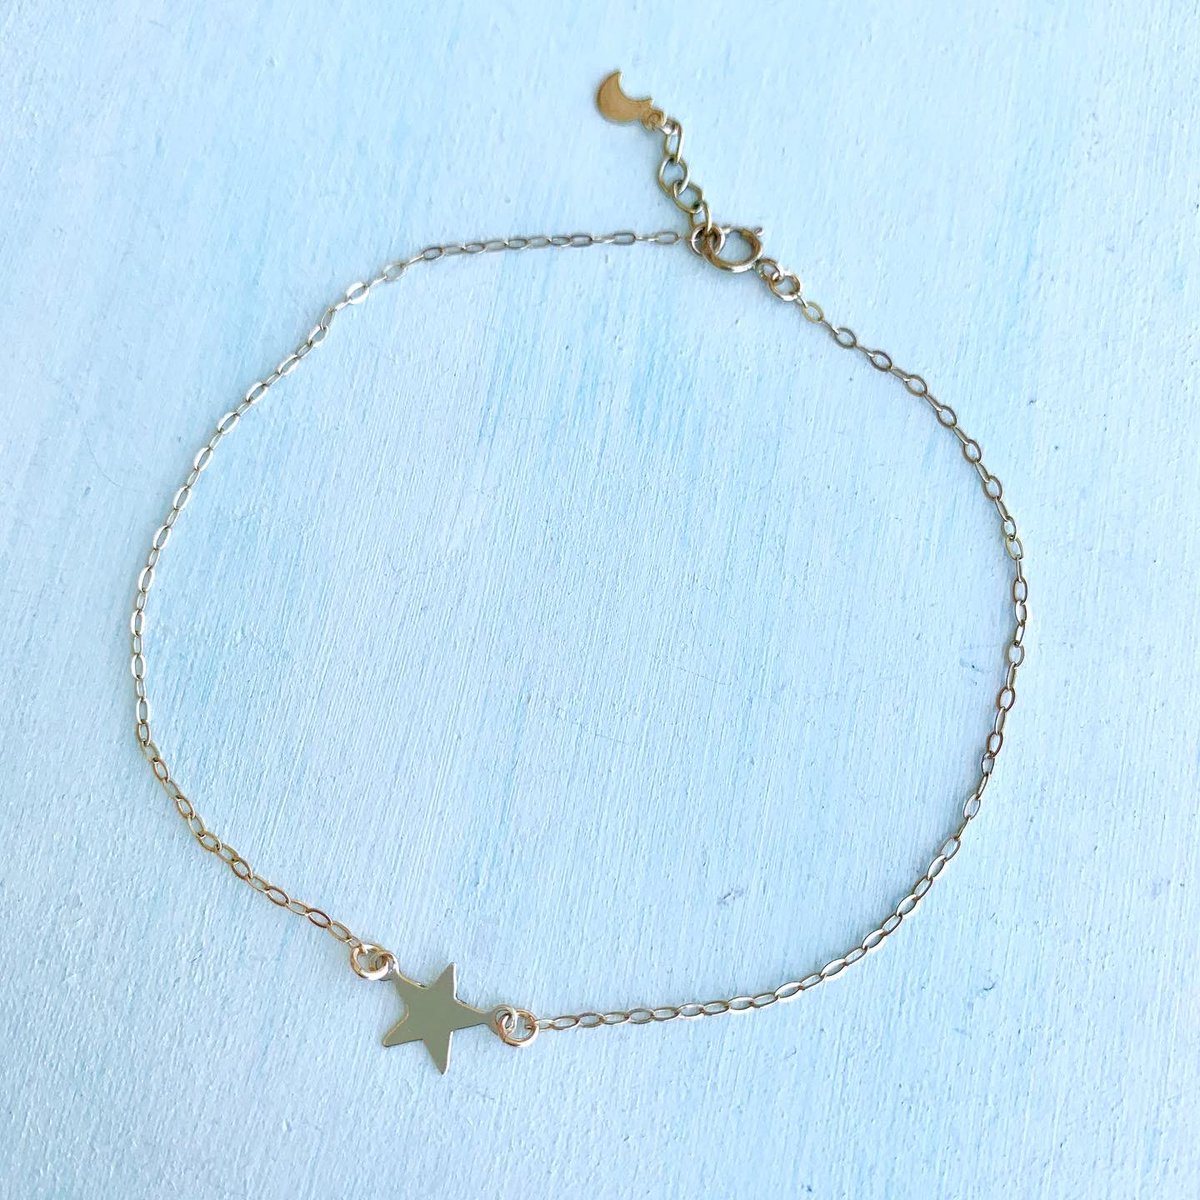 🌟 Dreaming Star Anklet 🌟
Mini moon hanging from the clasp🌙
All components are 14K gold filled💫

More details → mimidesignshawaii.etsy.com

#staranklet #anklet #beachjewelry #islandjewelry #hawaiijewelry #madeinhawaii #mimidesignshawaii #14kgoldfilled #beachlover #beachstyle